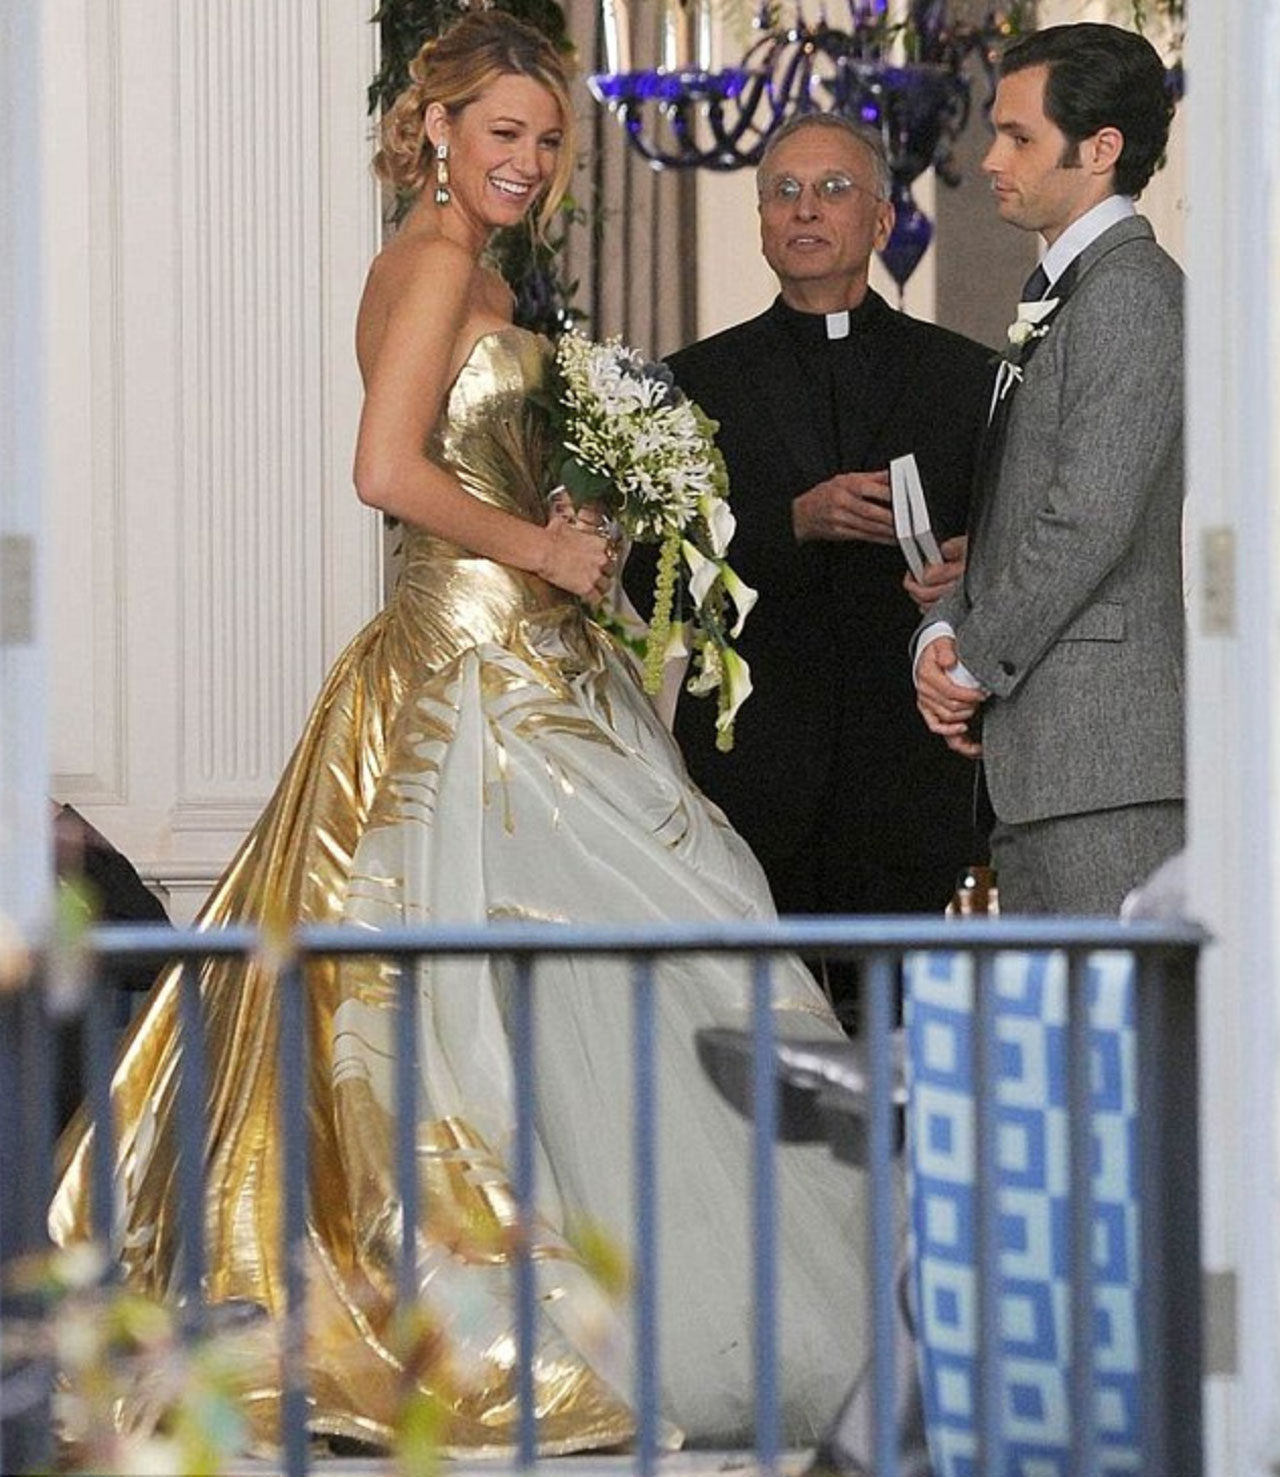 Blake Lively, as bride Serena van der Woodsen, wore gold couture for the we...